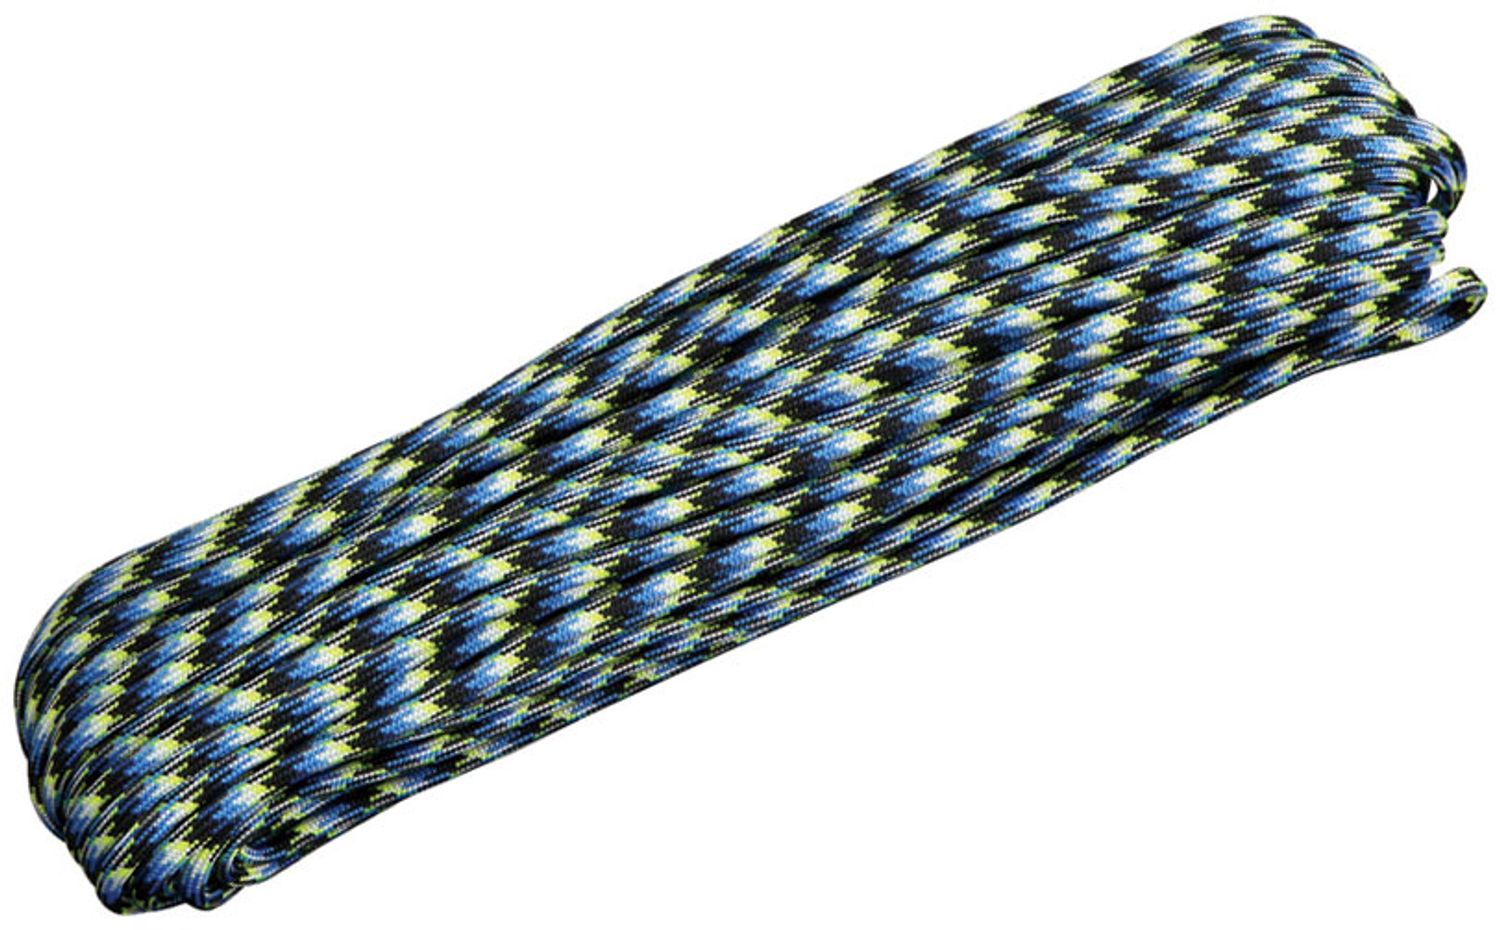 Atwood Rope 550 Paracord, Blue Snake, 100 Feet - KnifeCenter - RG008H